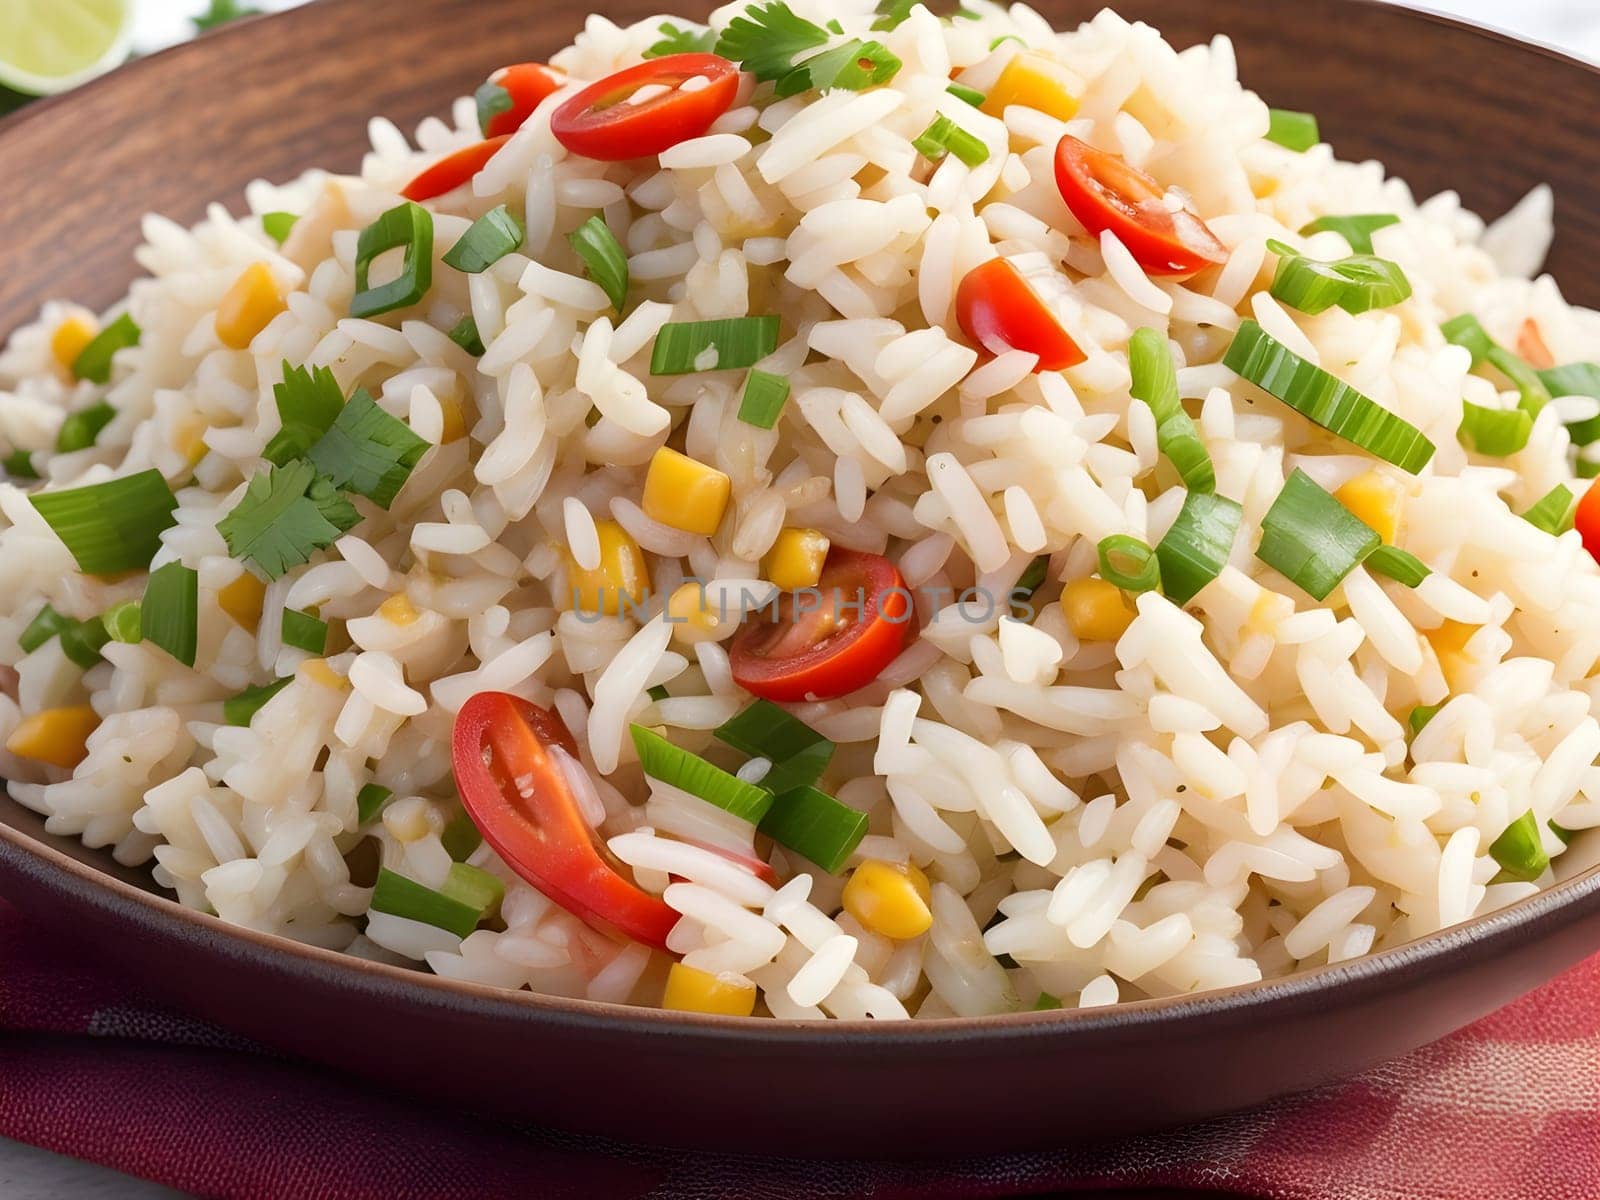 A symphony of flavors in a healthy rice salad.